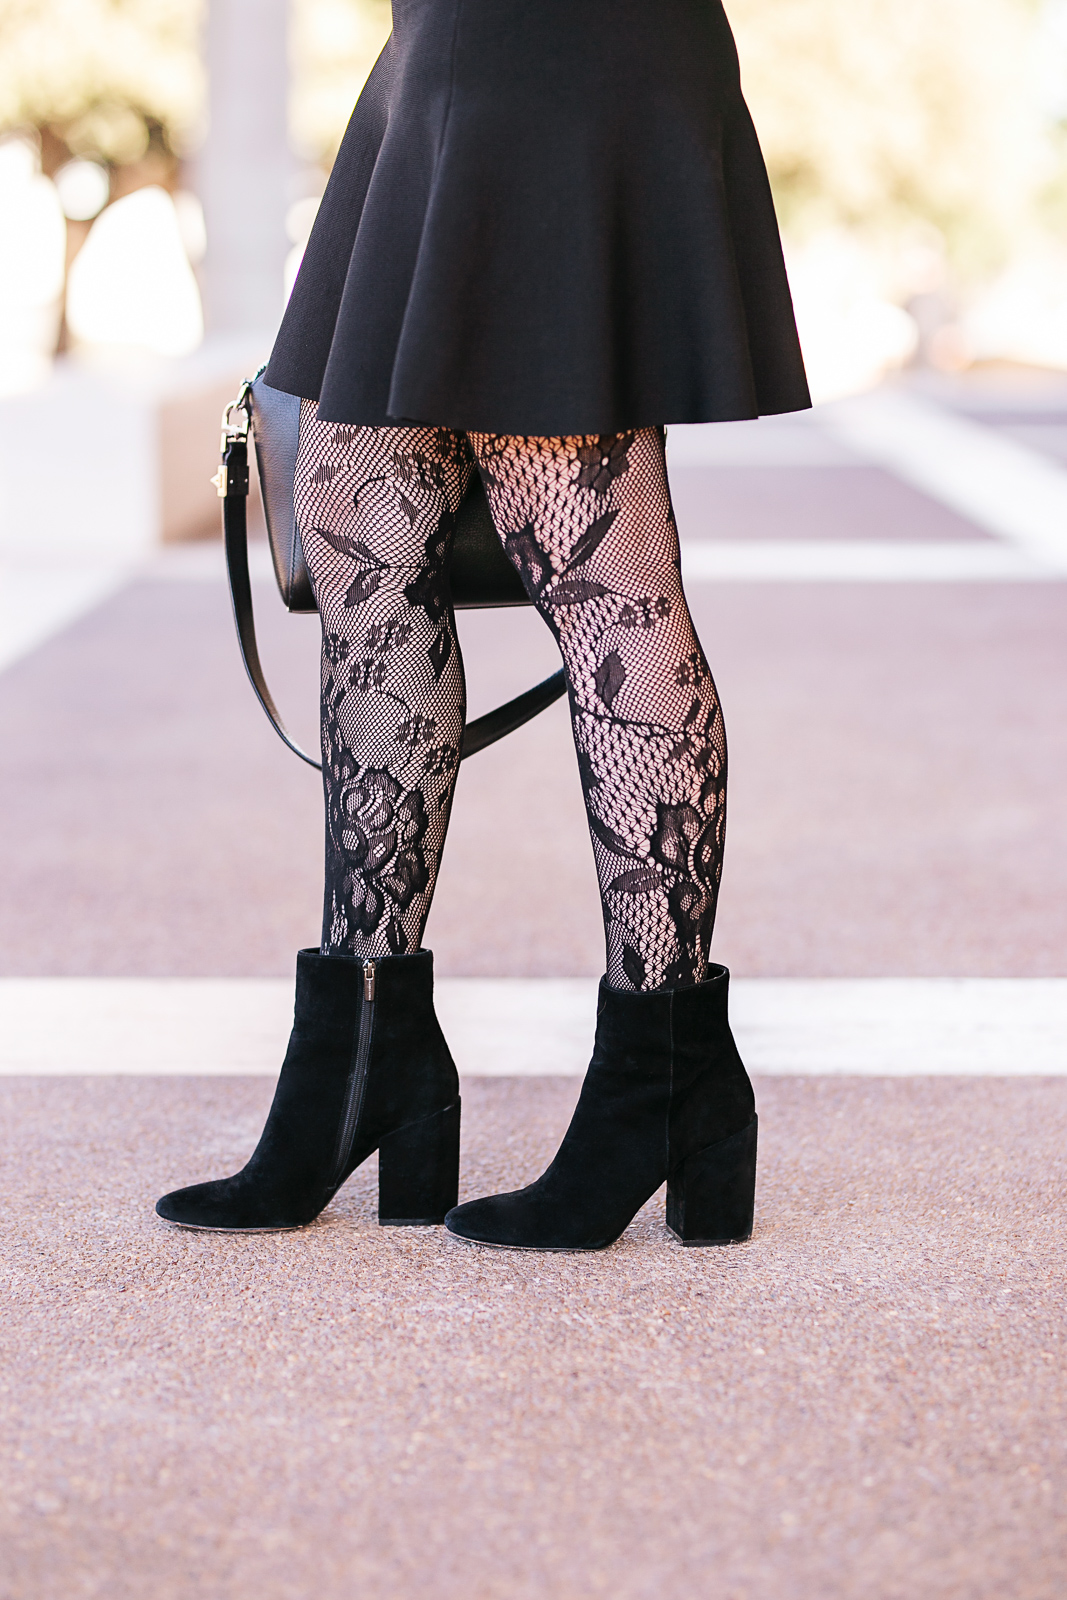 5 Creative Ways to Wear Patterned Tights